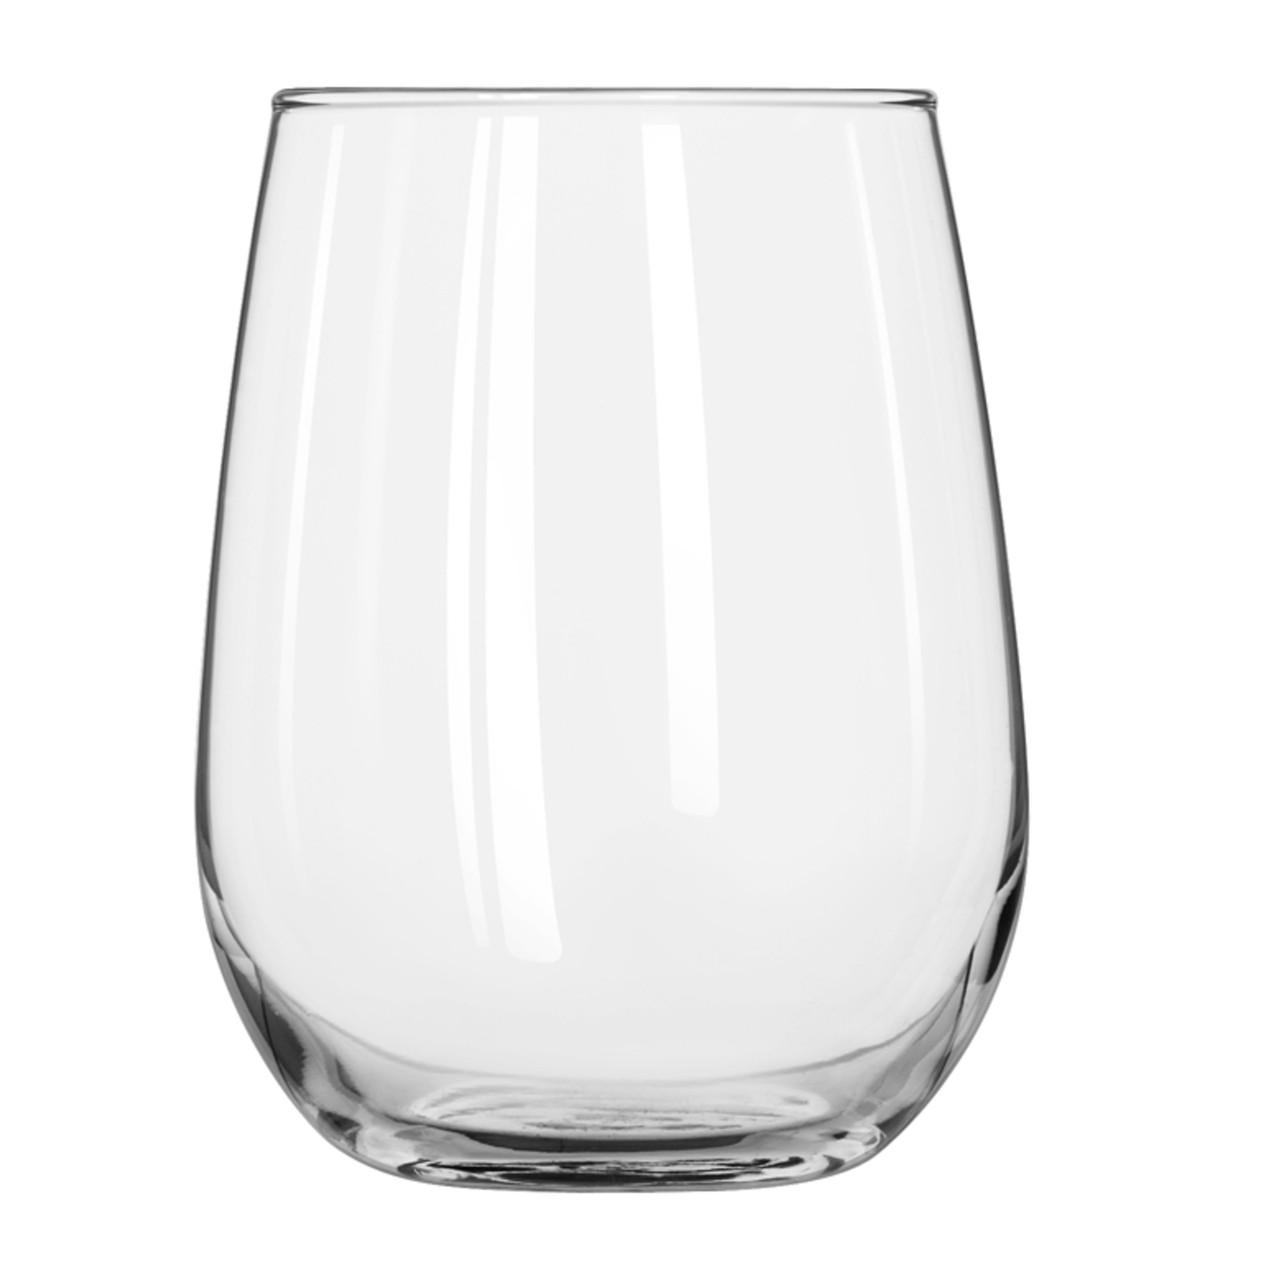 https://cdn11.bigcommerce.com/s-oo0gdojvjo/images/stencil/1280x1280/products/68799/100941/libbey-vina-stemless-white-wine-glasses-set-of-4__30405.1683777563.jpg?c=2&imbypass=on